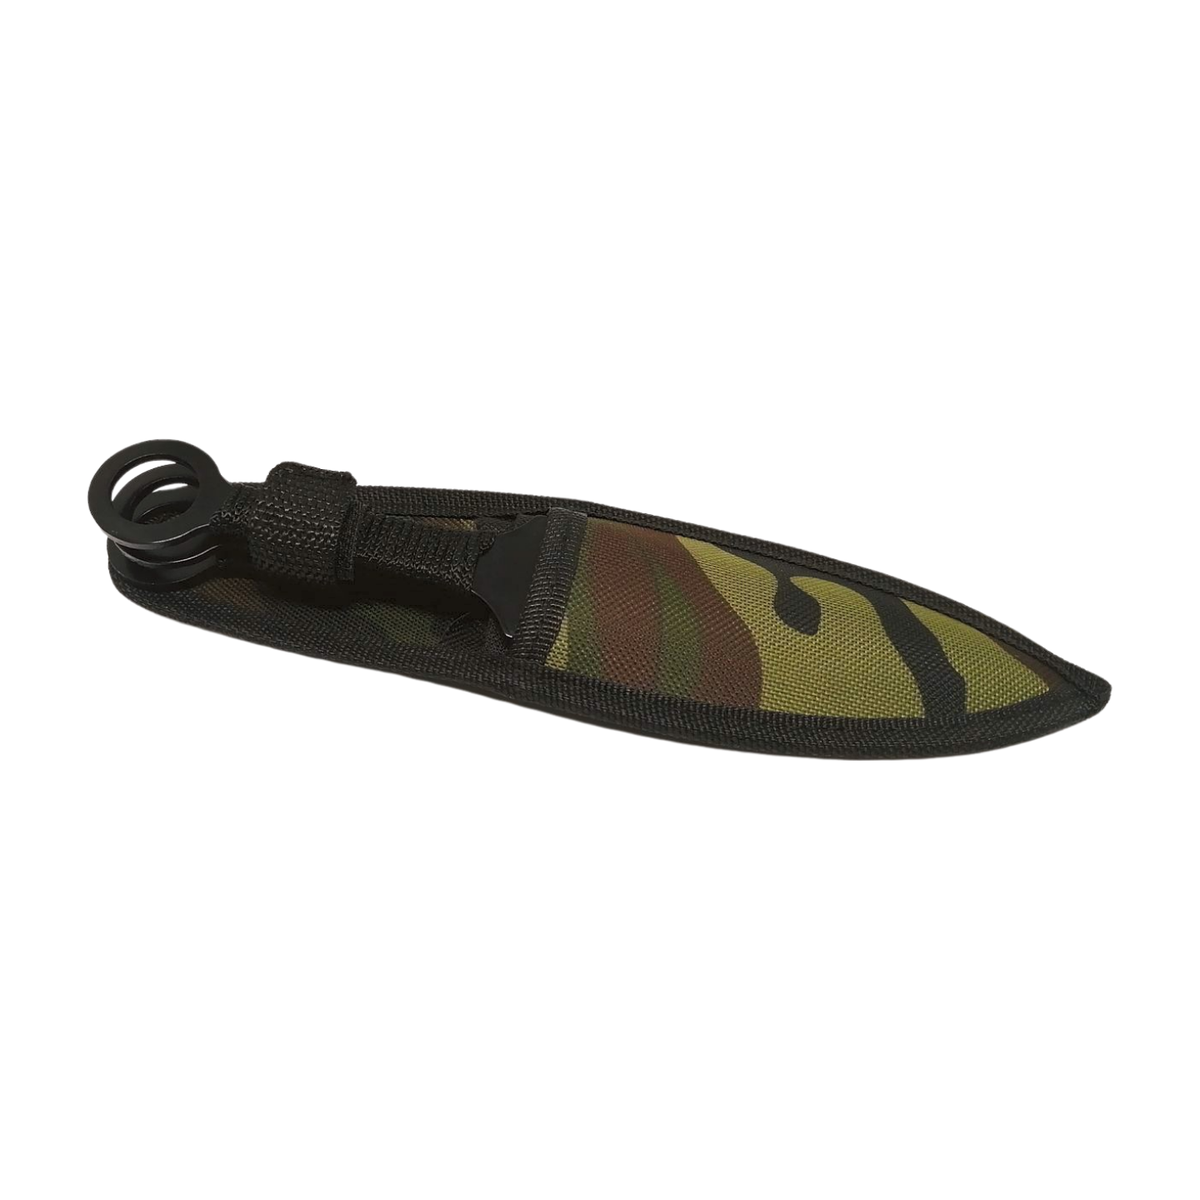 Fixed Blade Throwing Knife Set (3) with Camo Sheath